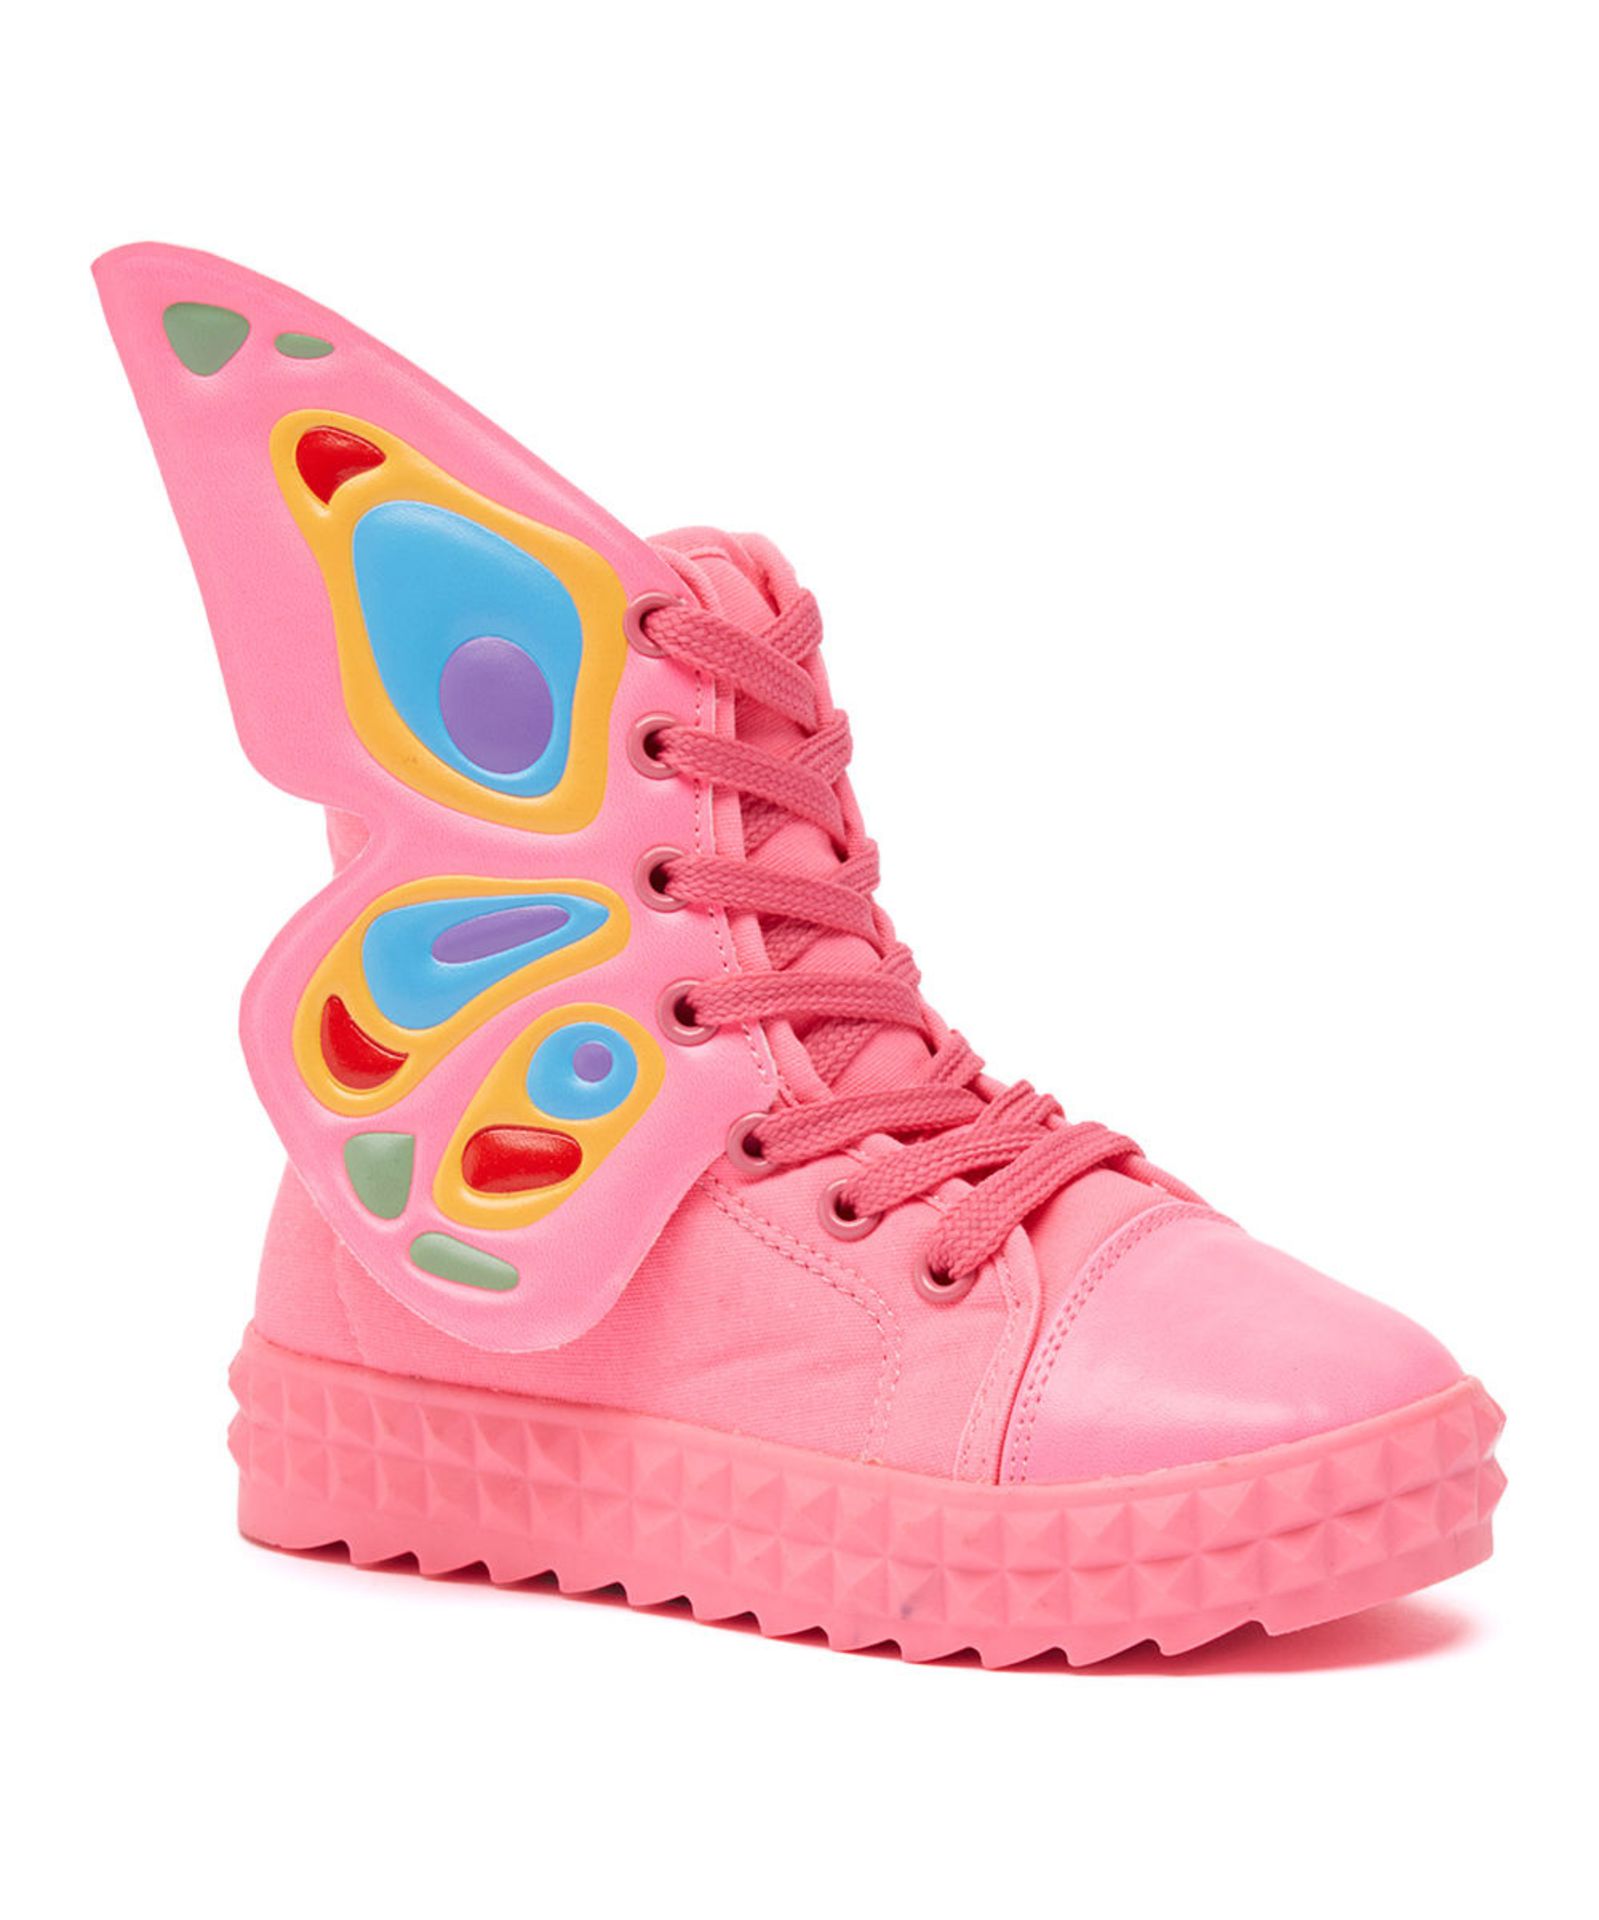 COCO Jumbo, Pink Butterfly Hi-Top Sneaker, US Toddler Size 7 (New with box) [Ref: 35107949]